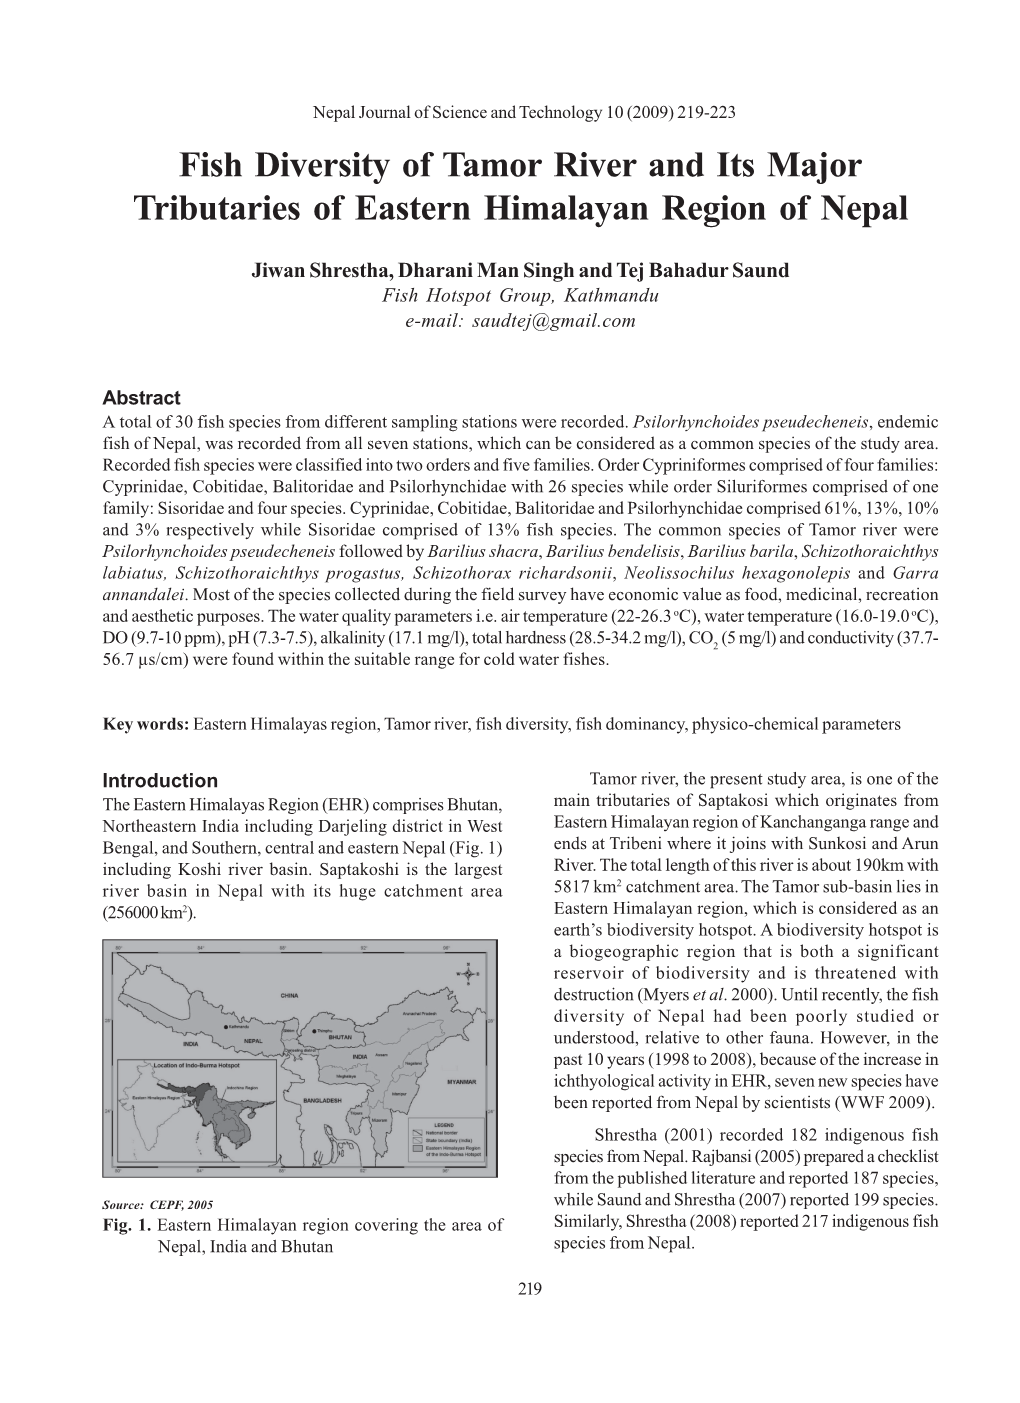 Fish Diversity of Tamor River and Its Major Tributaries of Eastern Himalayan Region of Nepal